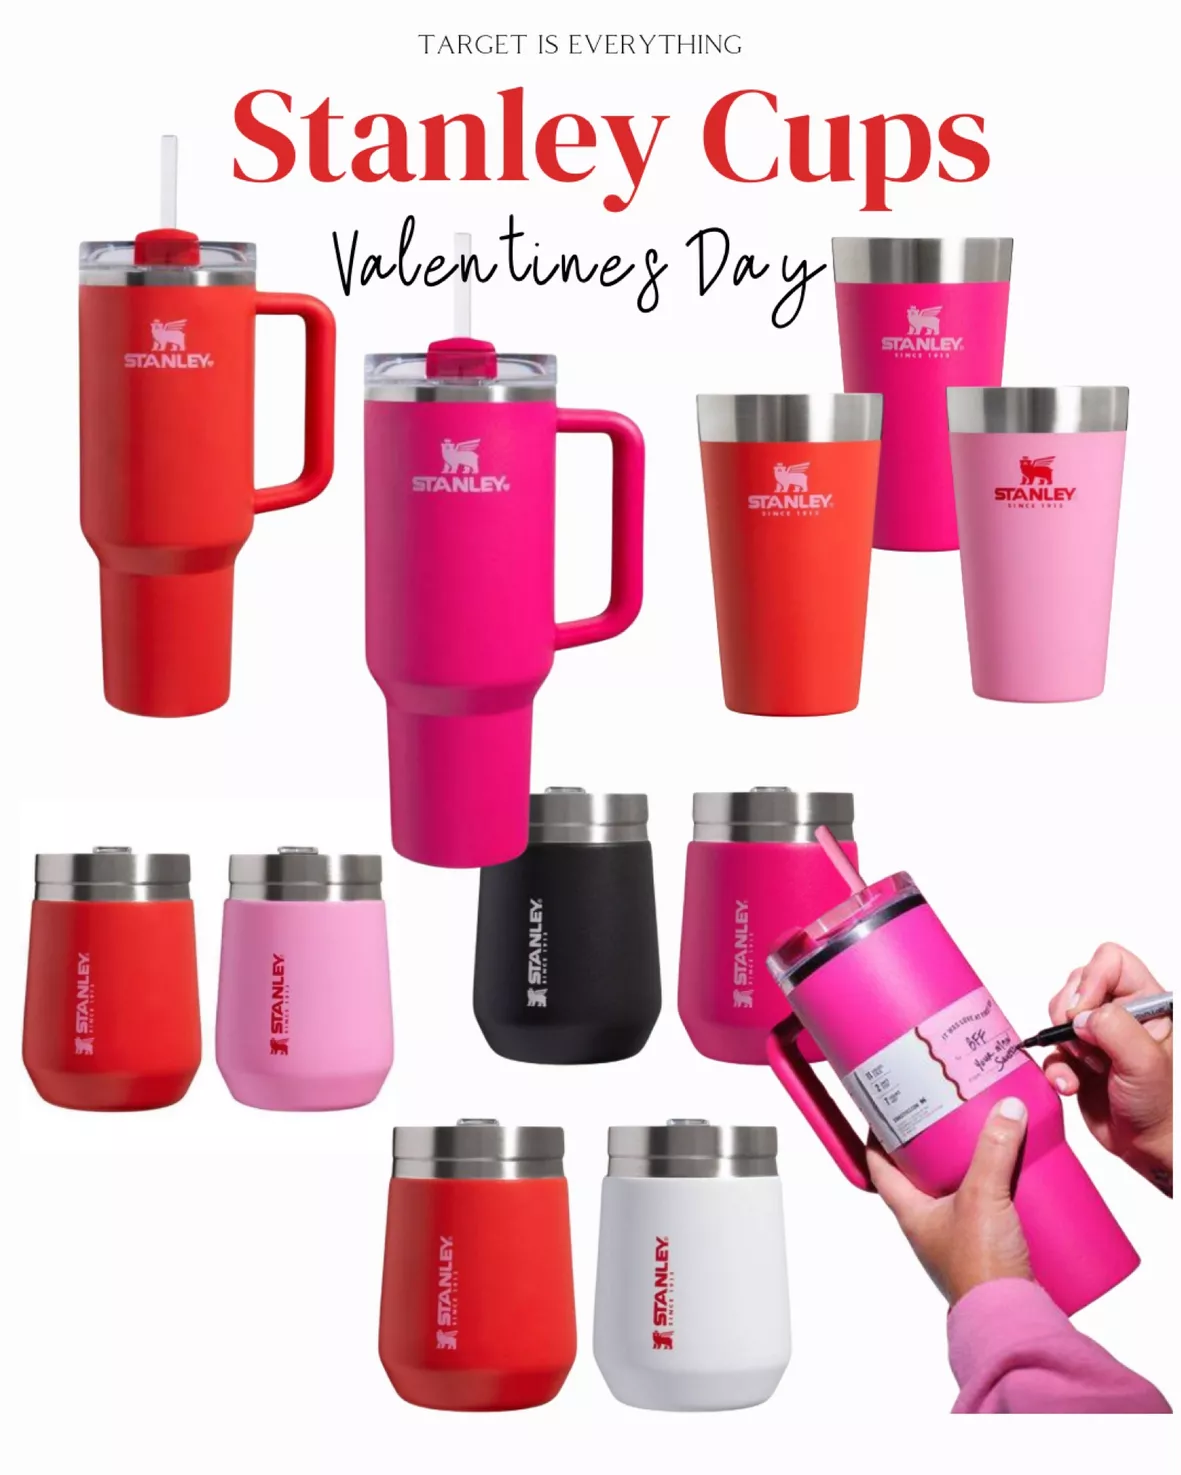 Stanley Big Grip Travel Quencher … curated on LTK